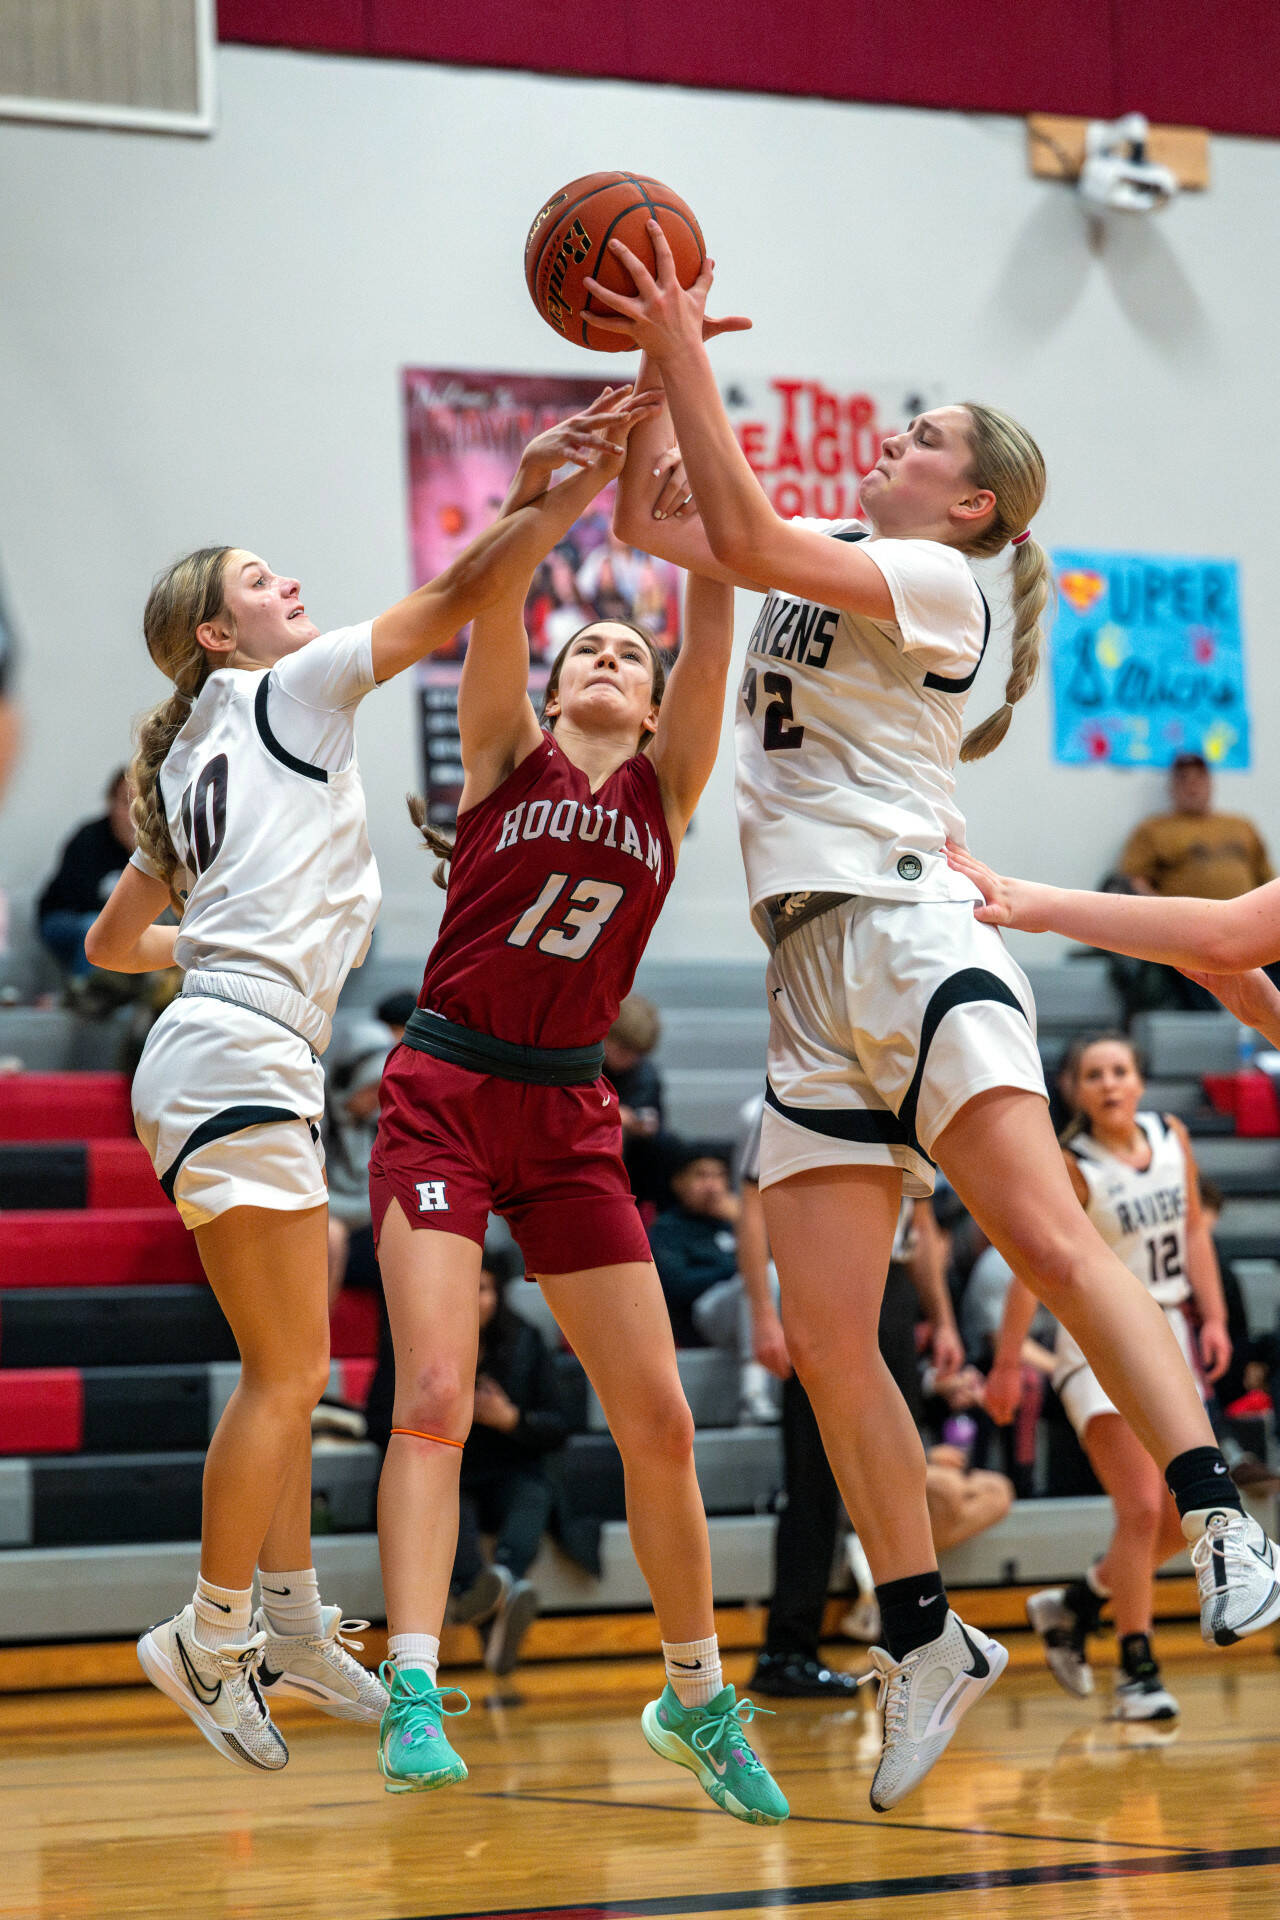 PHOTO BY FOREST WORGUM Raymond-South Bend’s Emma Glazier, left, and Kassie Koski, right, compete for a rebound against Hoquiam’s Katlyn Brodhead during the Ravens’ 49-17 win on Friday in Raymond.